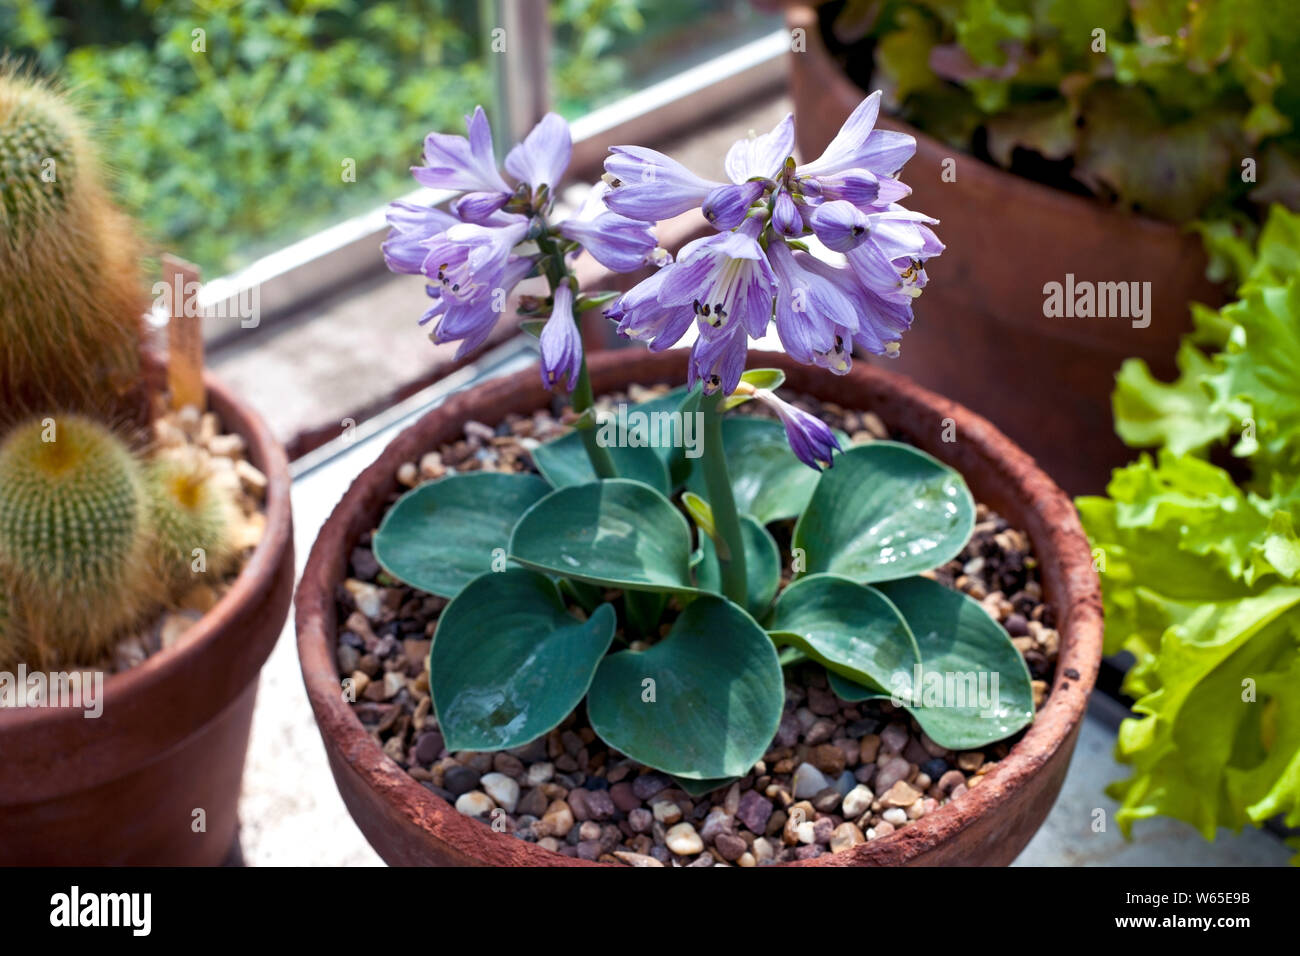 Close up of Blue mouse ears miniature Hosta plant with lilac flowers growing in a clay pot in a greenhouse England UK United Kingdom GB Great Britain Stock Photo